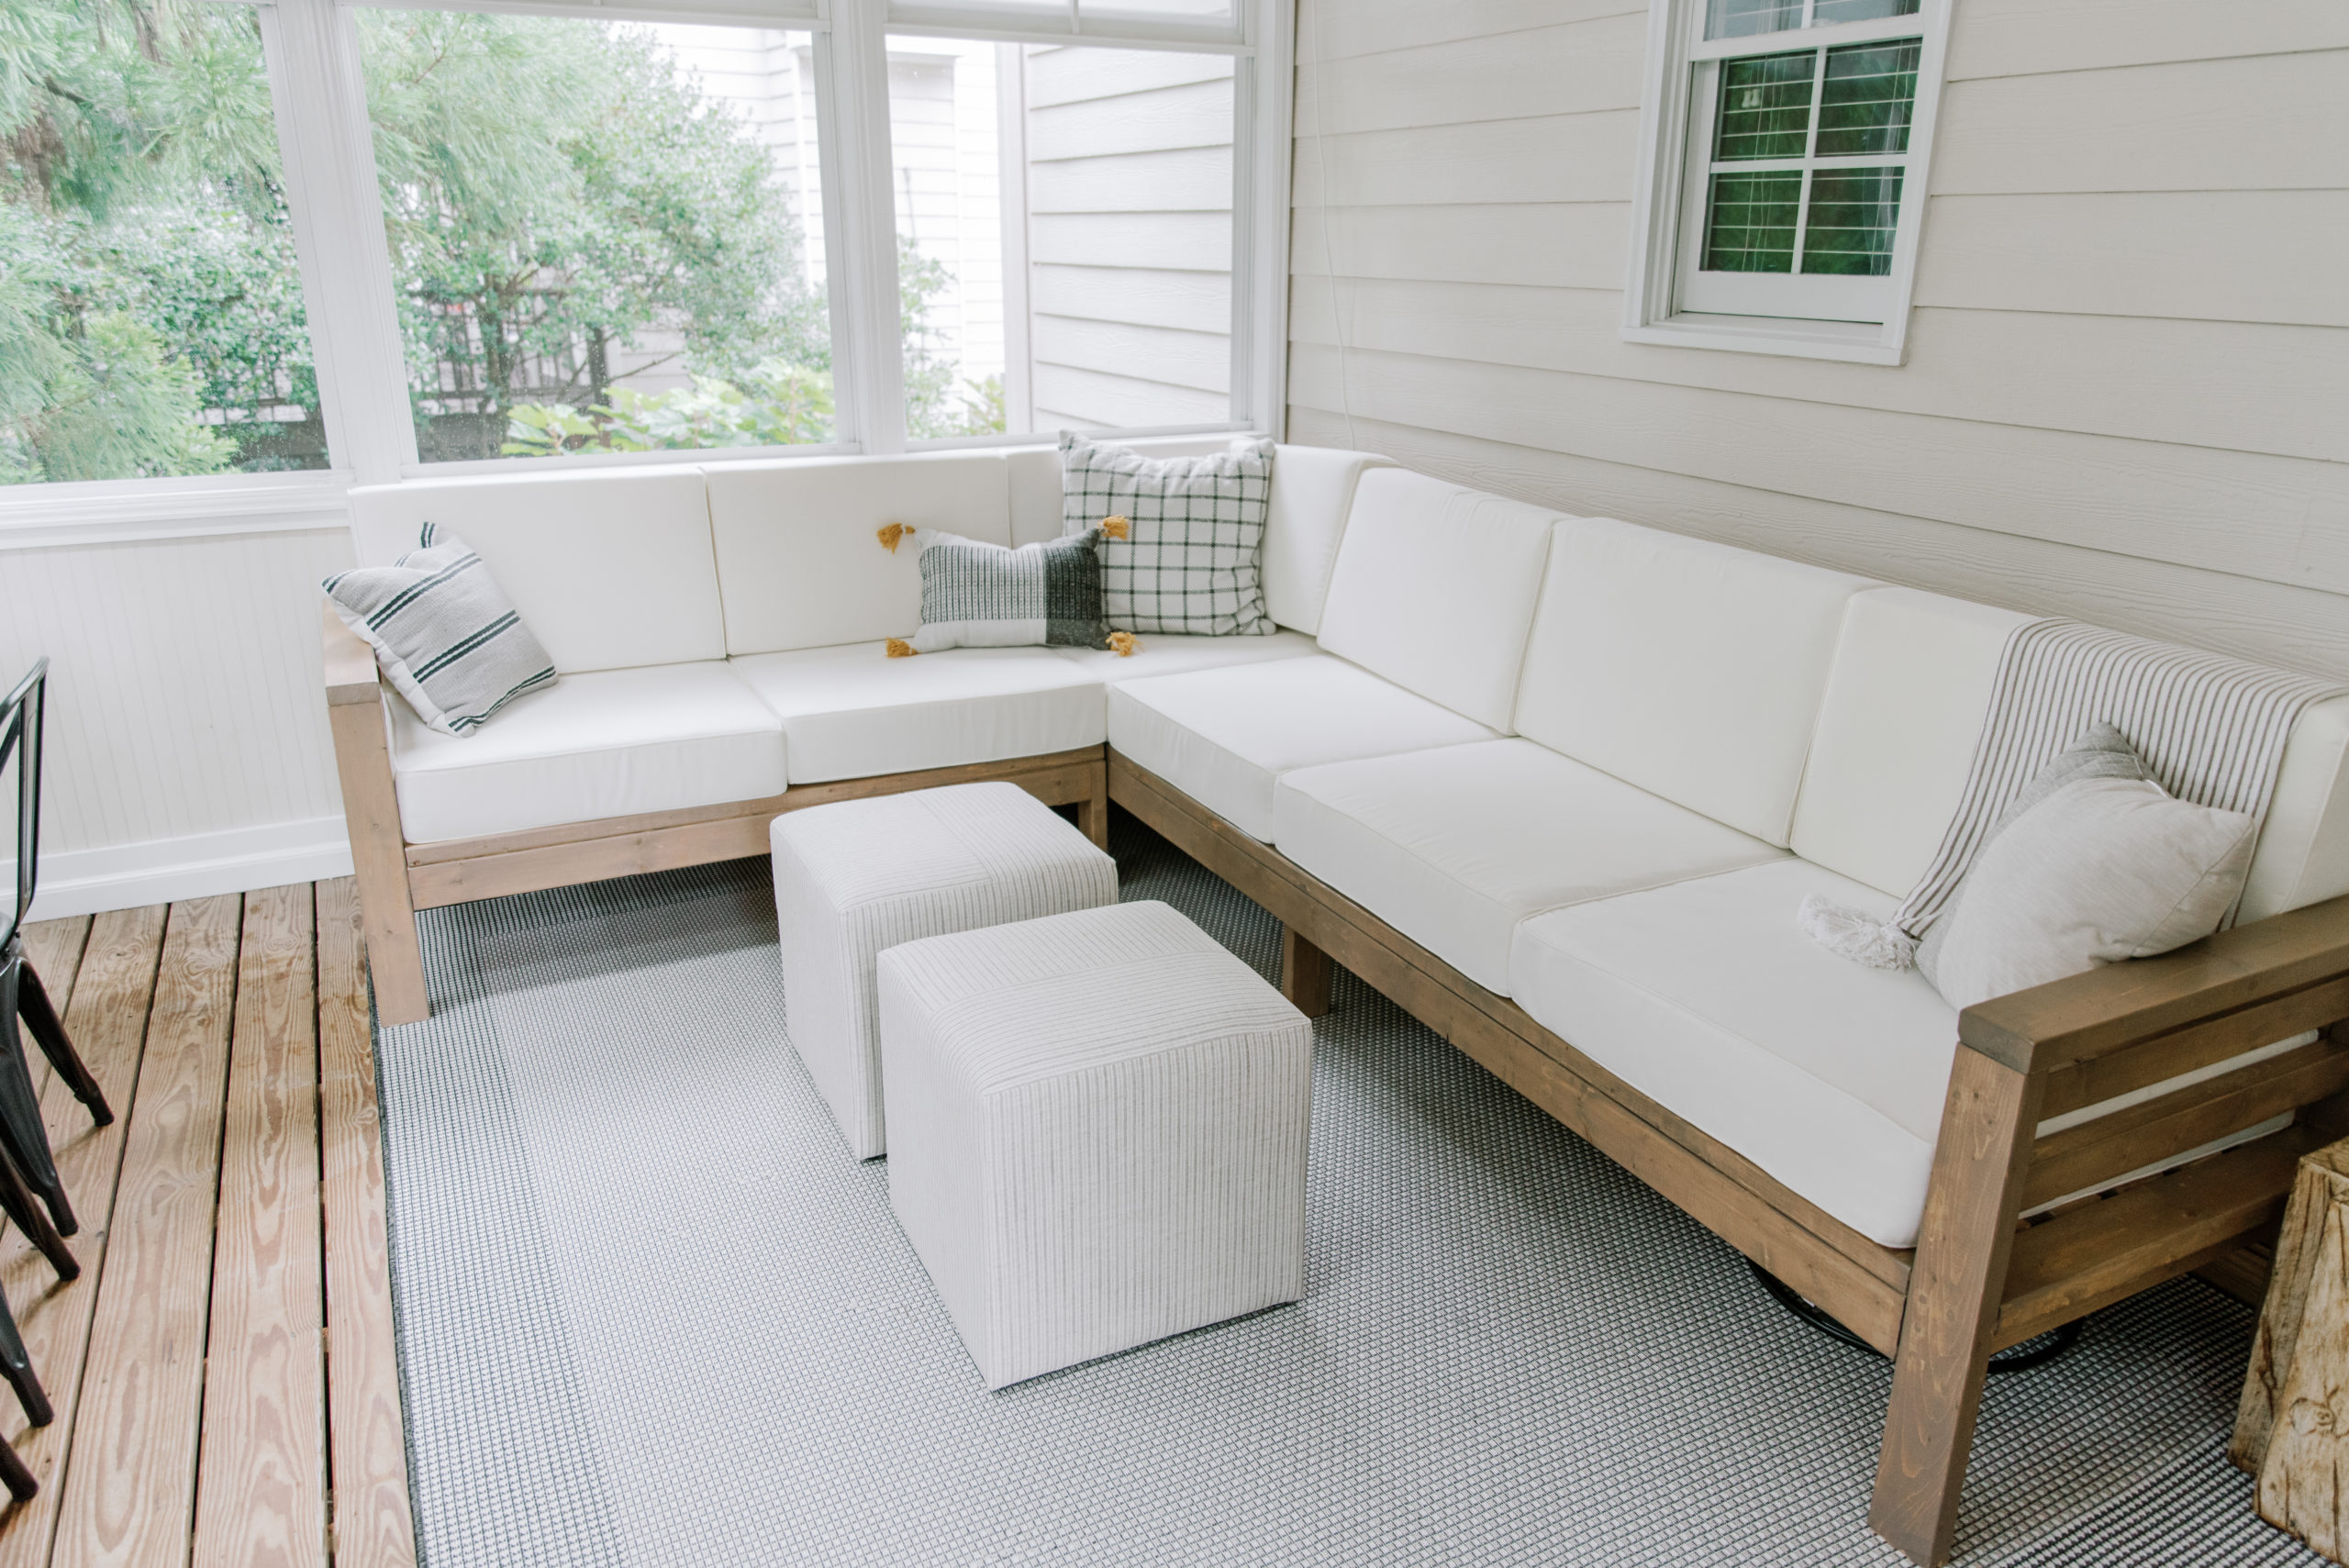 How to build a outdoor sectional